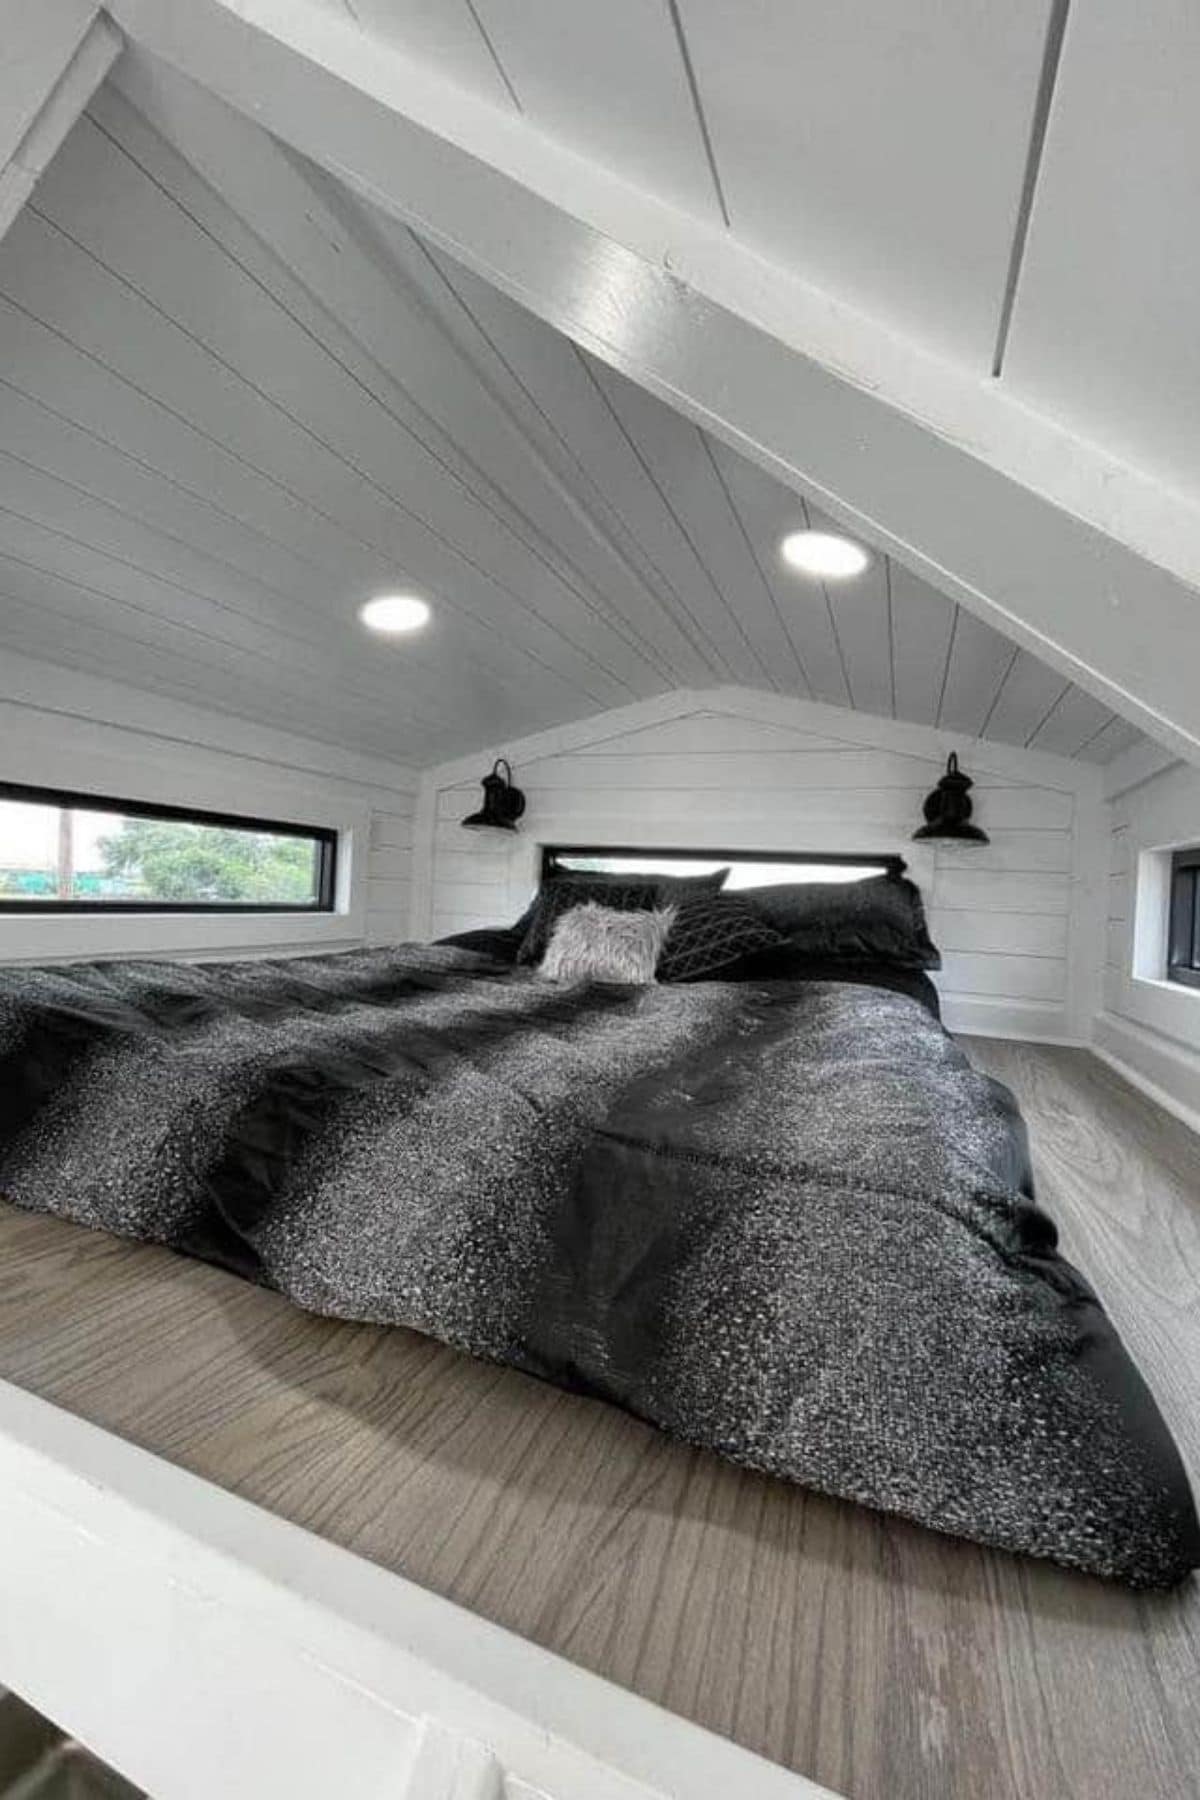 Black and gray bedding on mattress in white loft